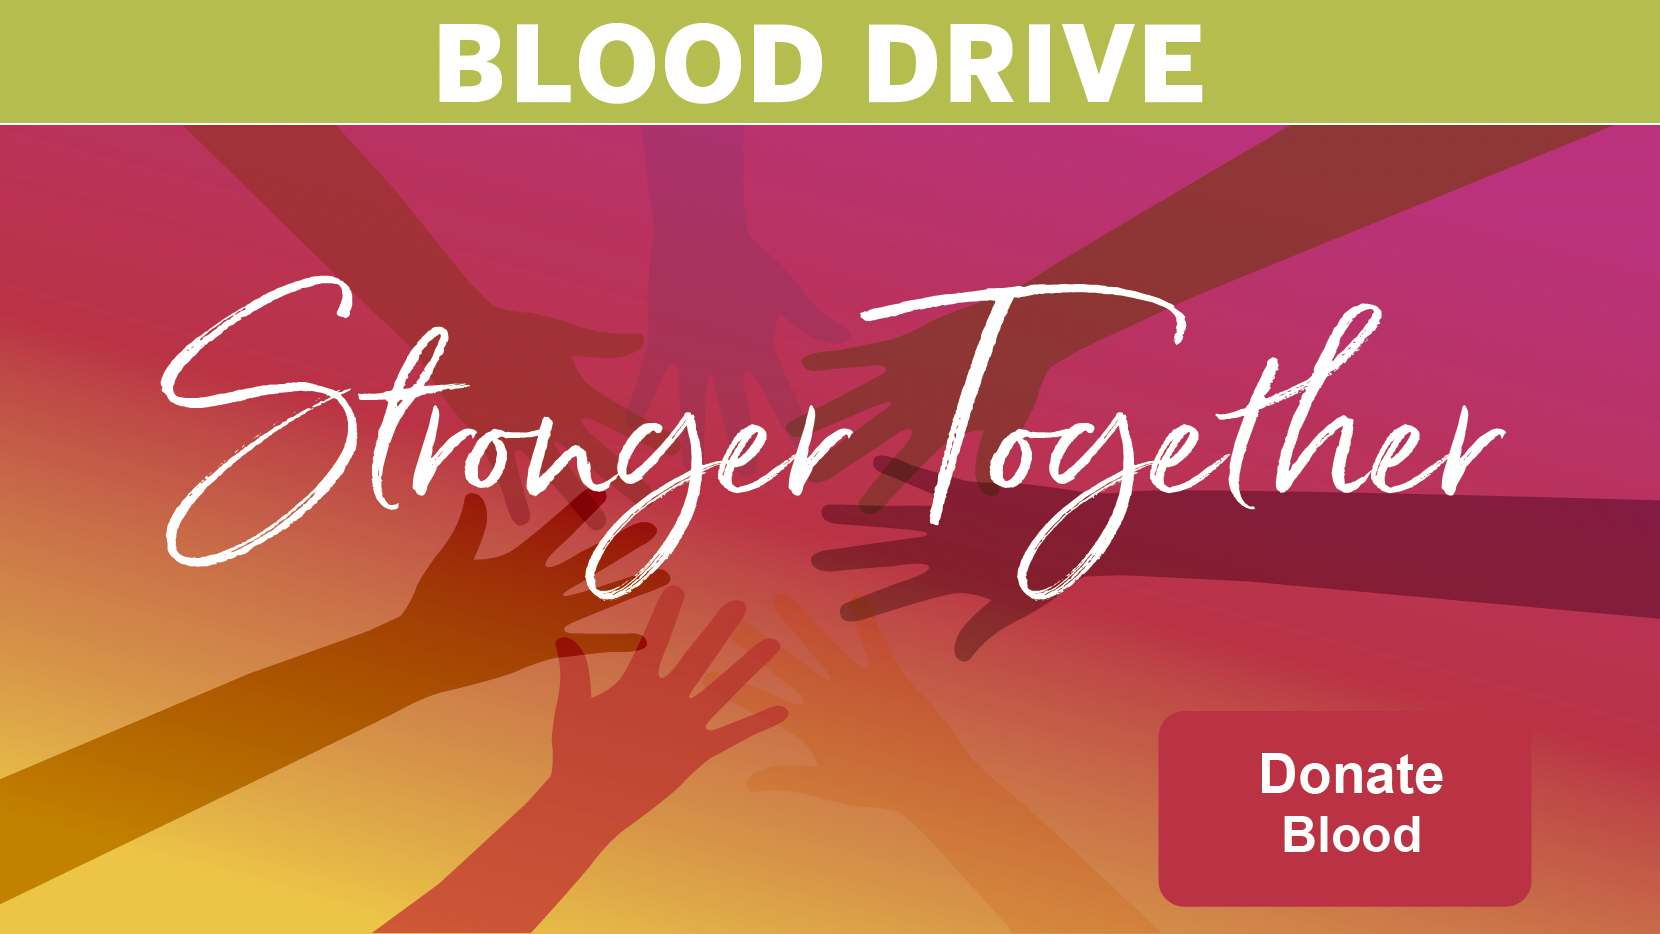 stronger together. give blood with photo of hands coming together